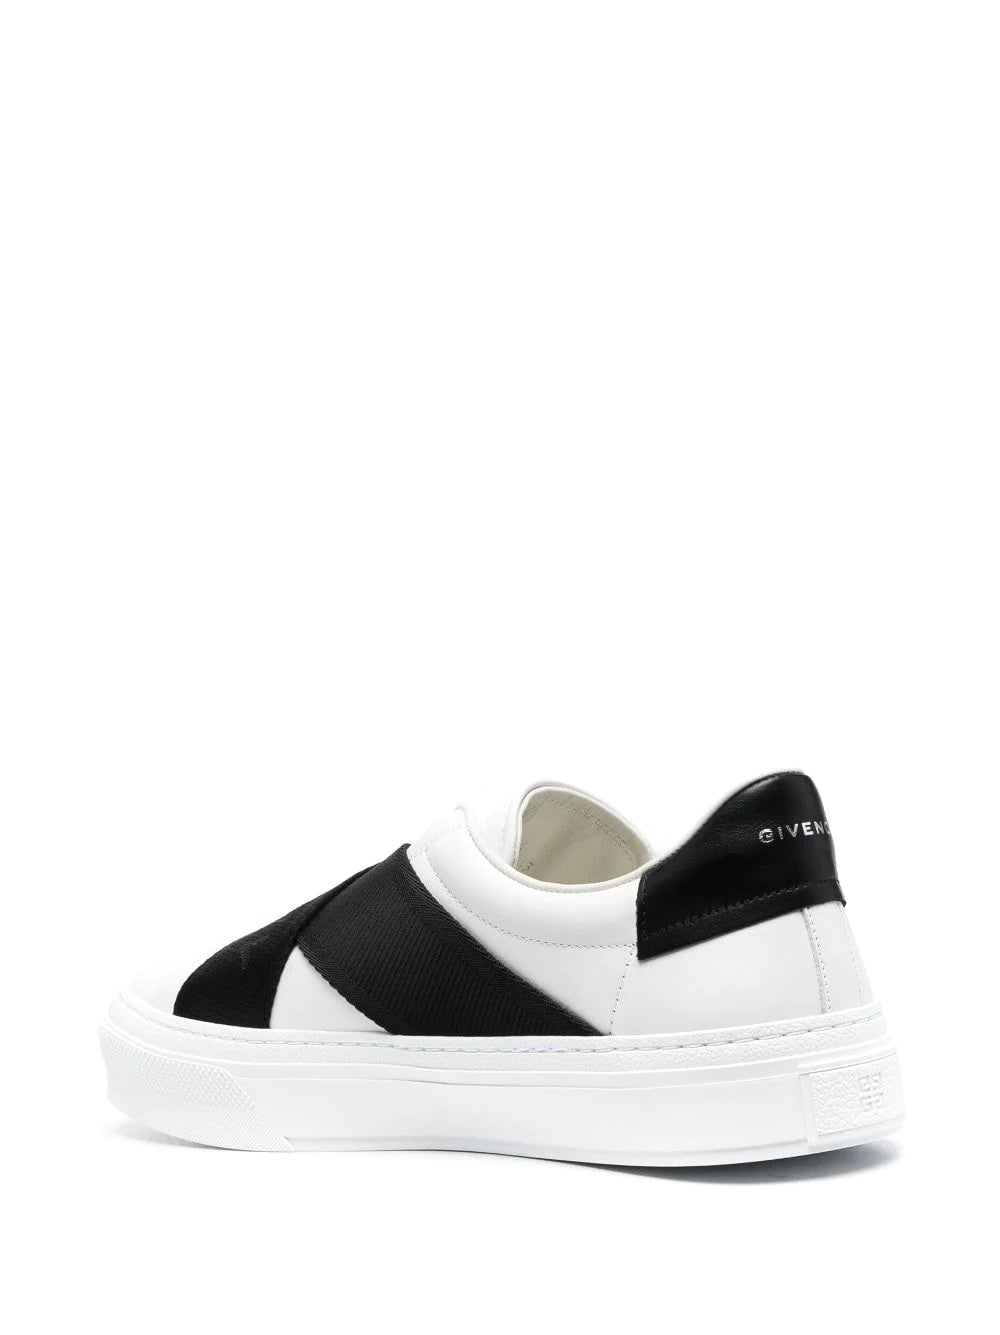 GIVENCHY
Sneakers in pelle bianca